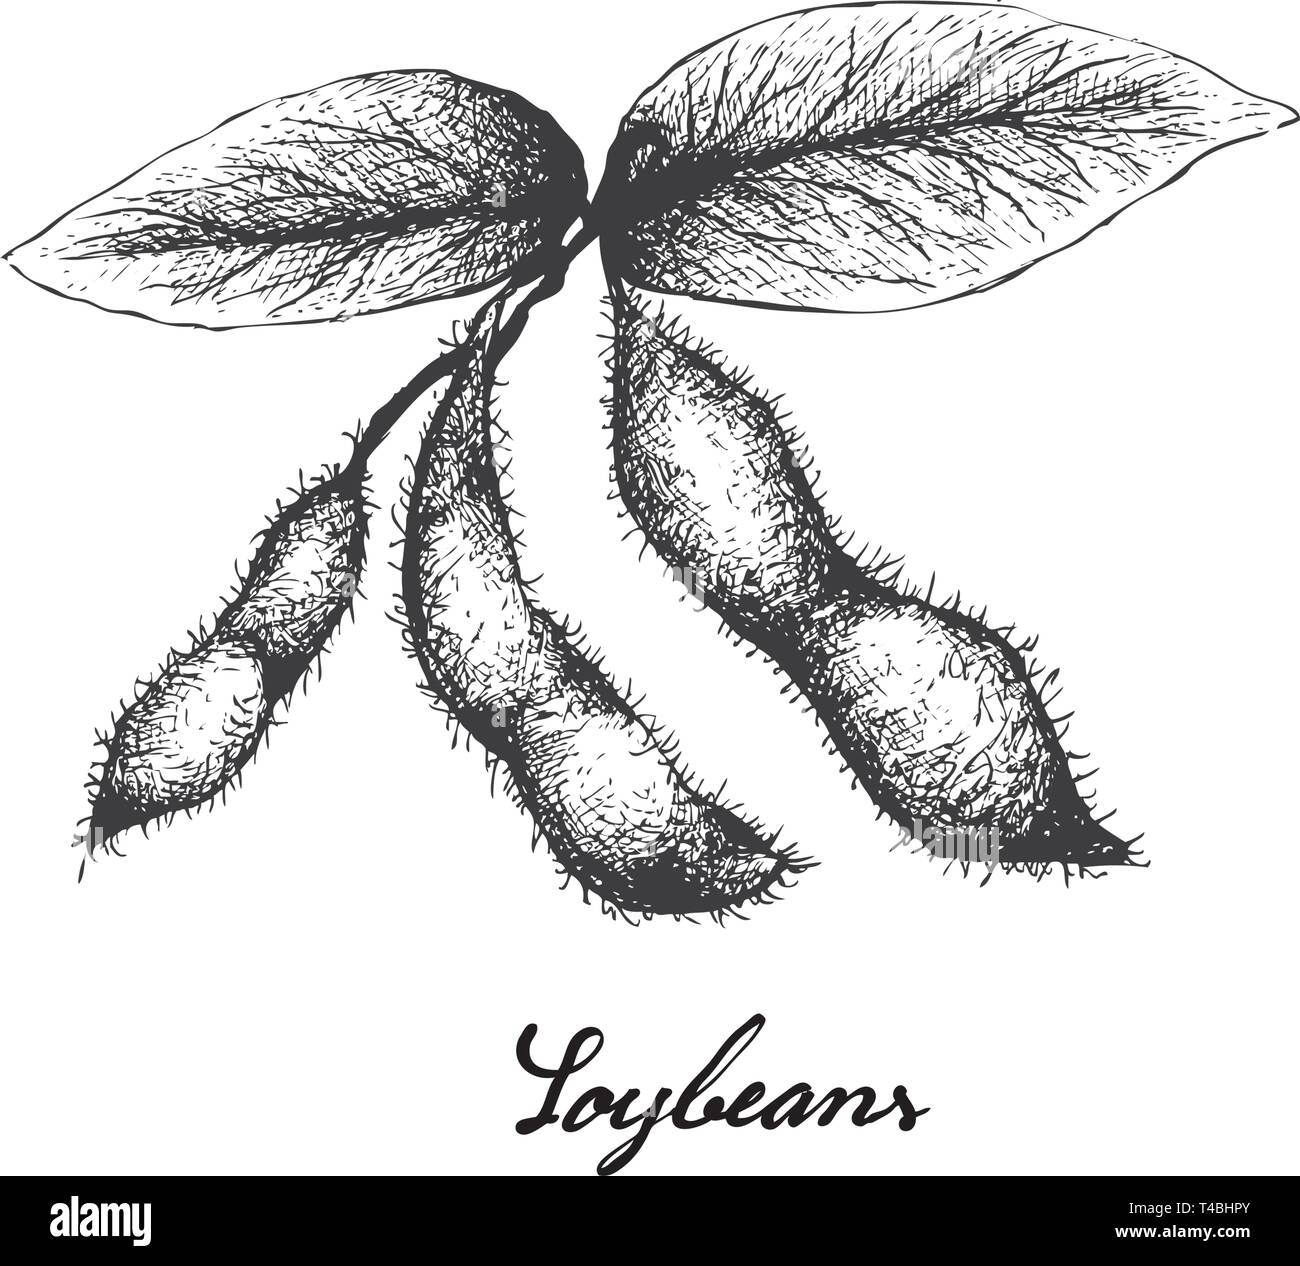 Vector Background With Soybean Plant Sketch Illustration Stock Illustration  - Download Image Now - iStock